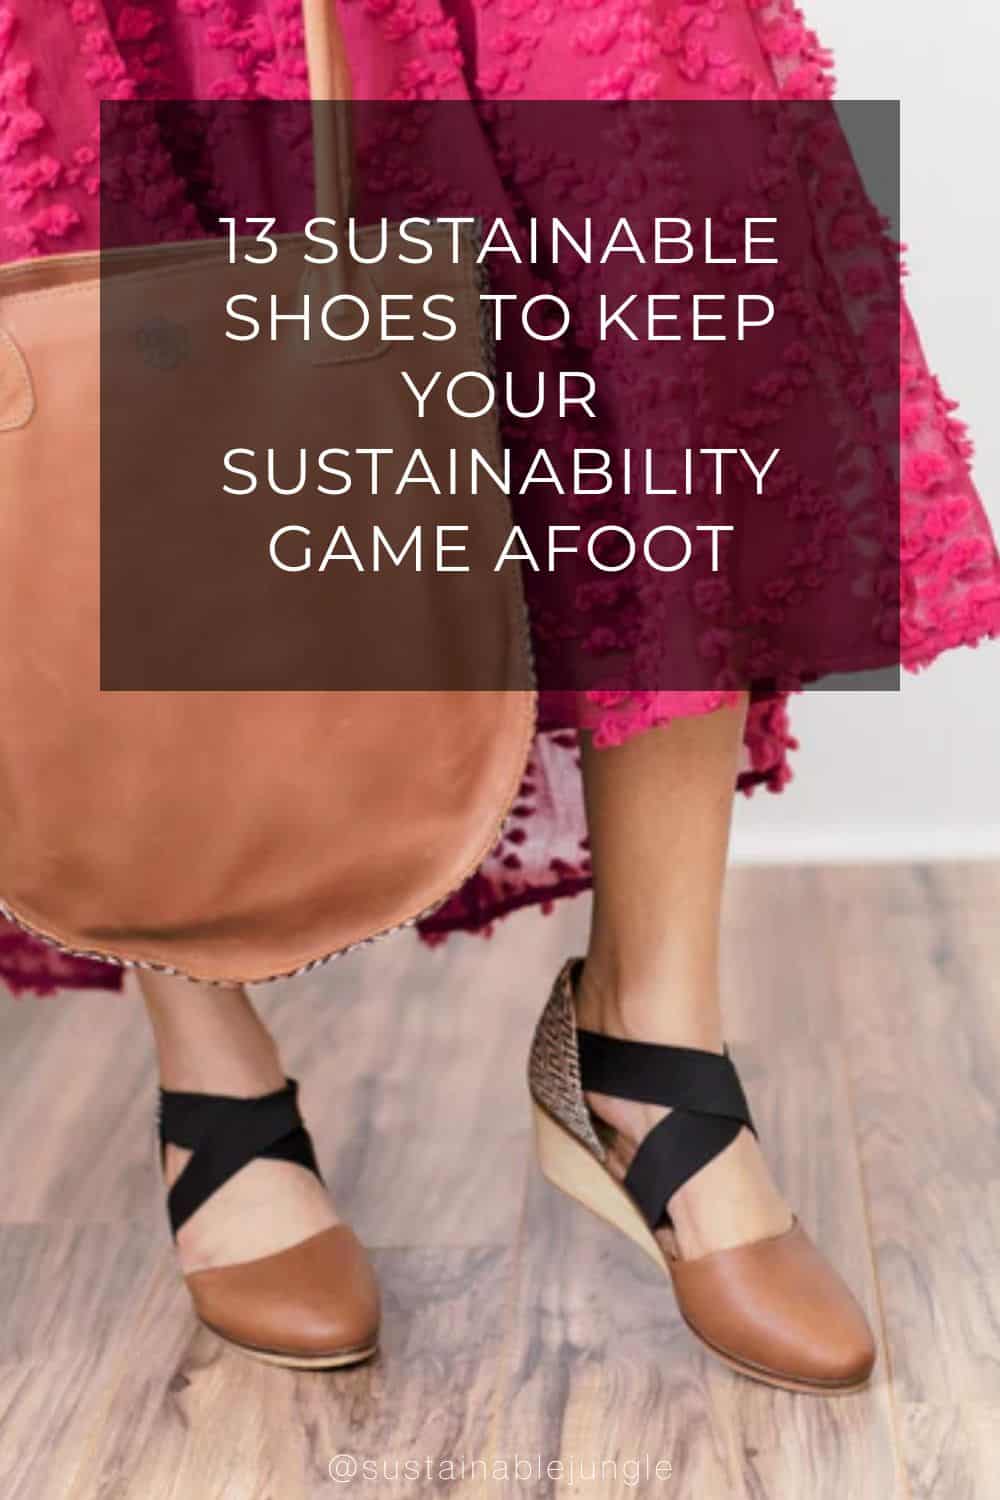 13 Sustainable Shoes To Keep Your Sustainability Game Afoot Image by The Root Collective #sustainableshoes #sustainableshoebrands #sustainablewomensshoes #ecofriendlyshoes #ecofriendlymensshoes #bestsustainableshoes #sustainablejungle